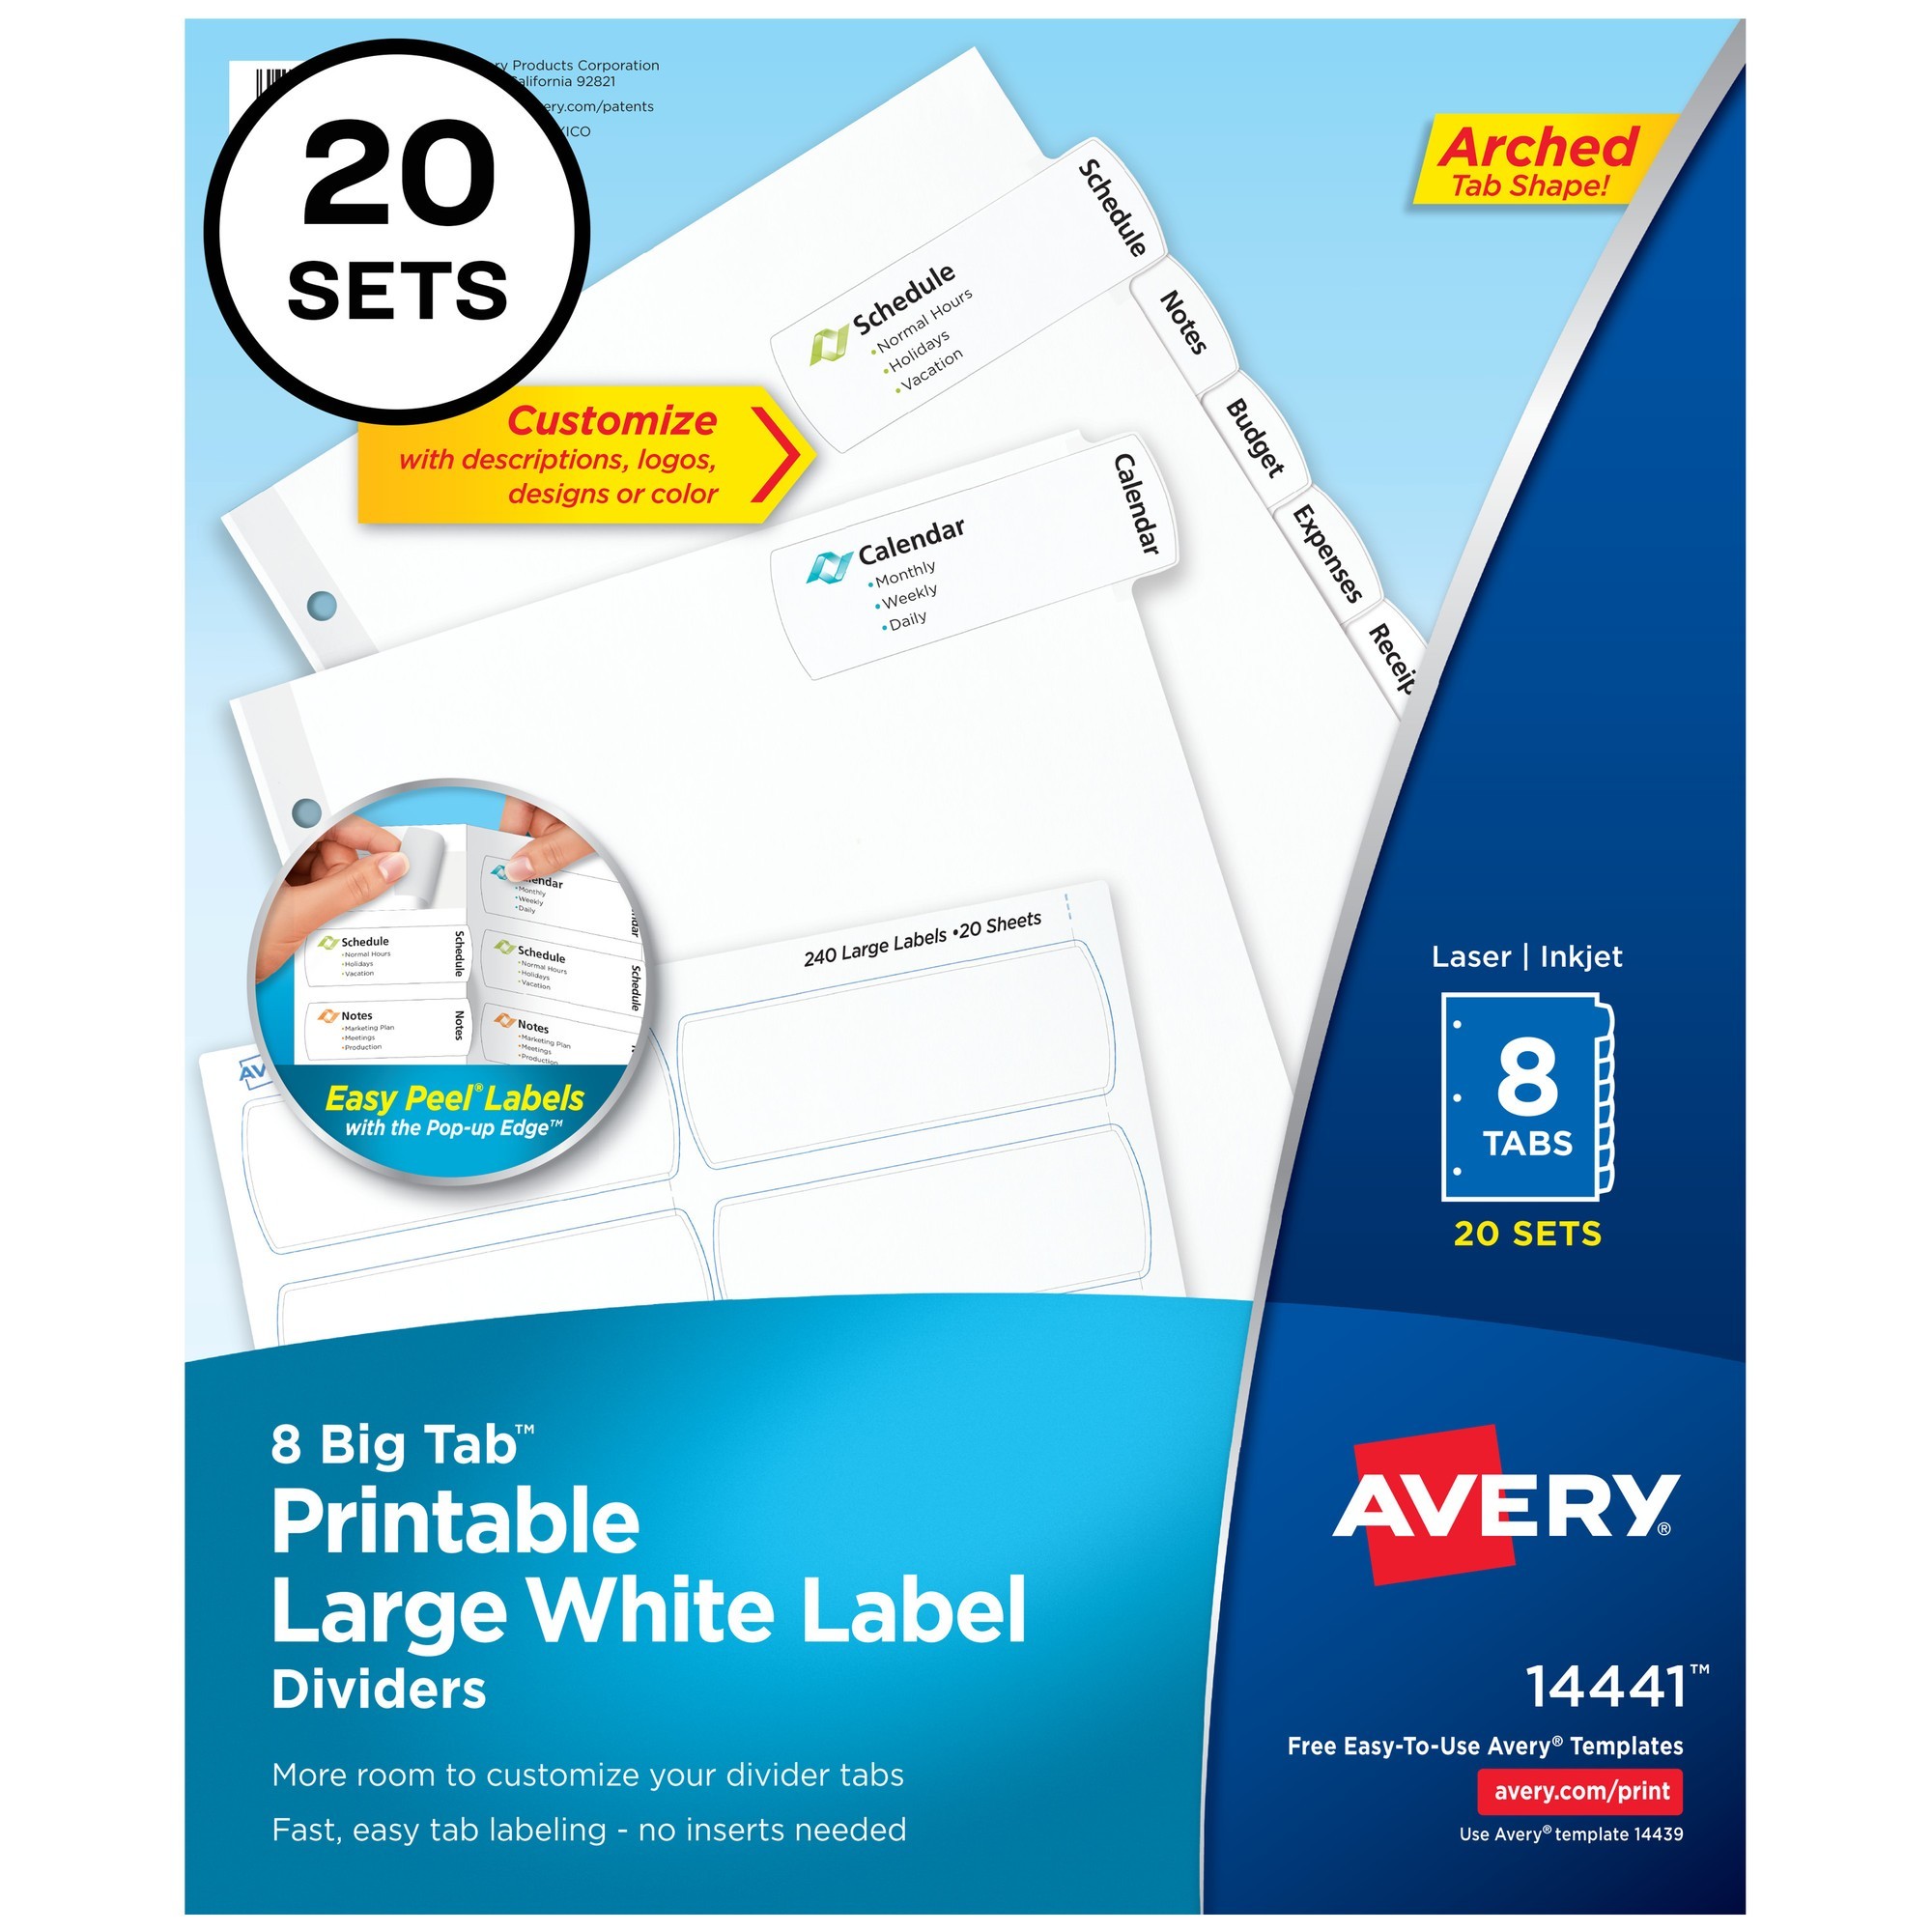 Avery Big Tab Printable Large White Dividers with Easy Peel, 8 Tabs - 160 x Divider(s) - 8 - 8 Tab(s)/Set - 8.5" Divider Wi